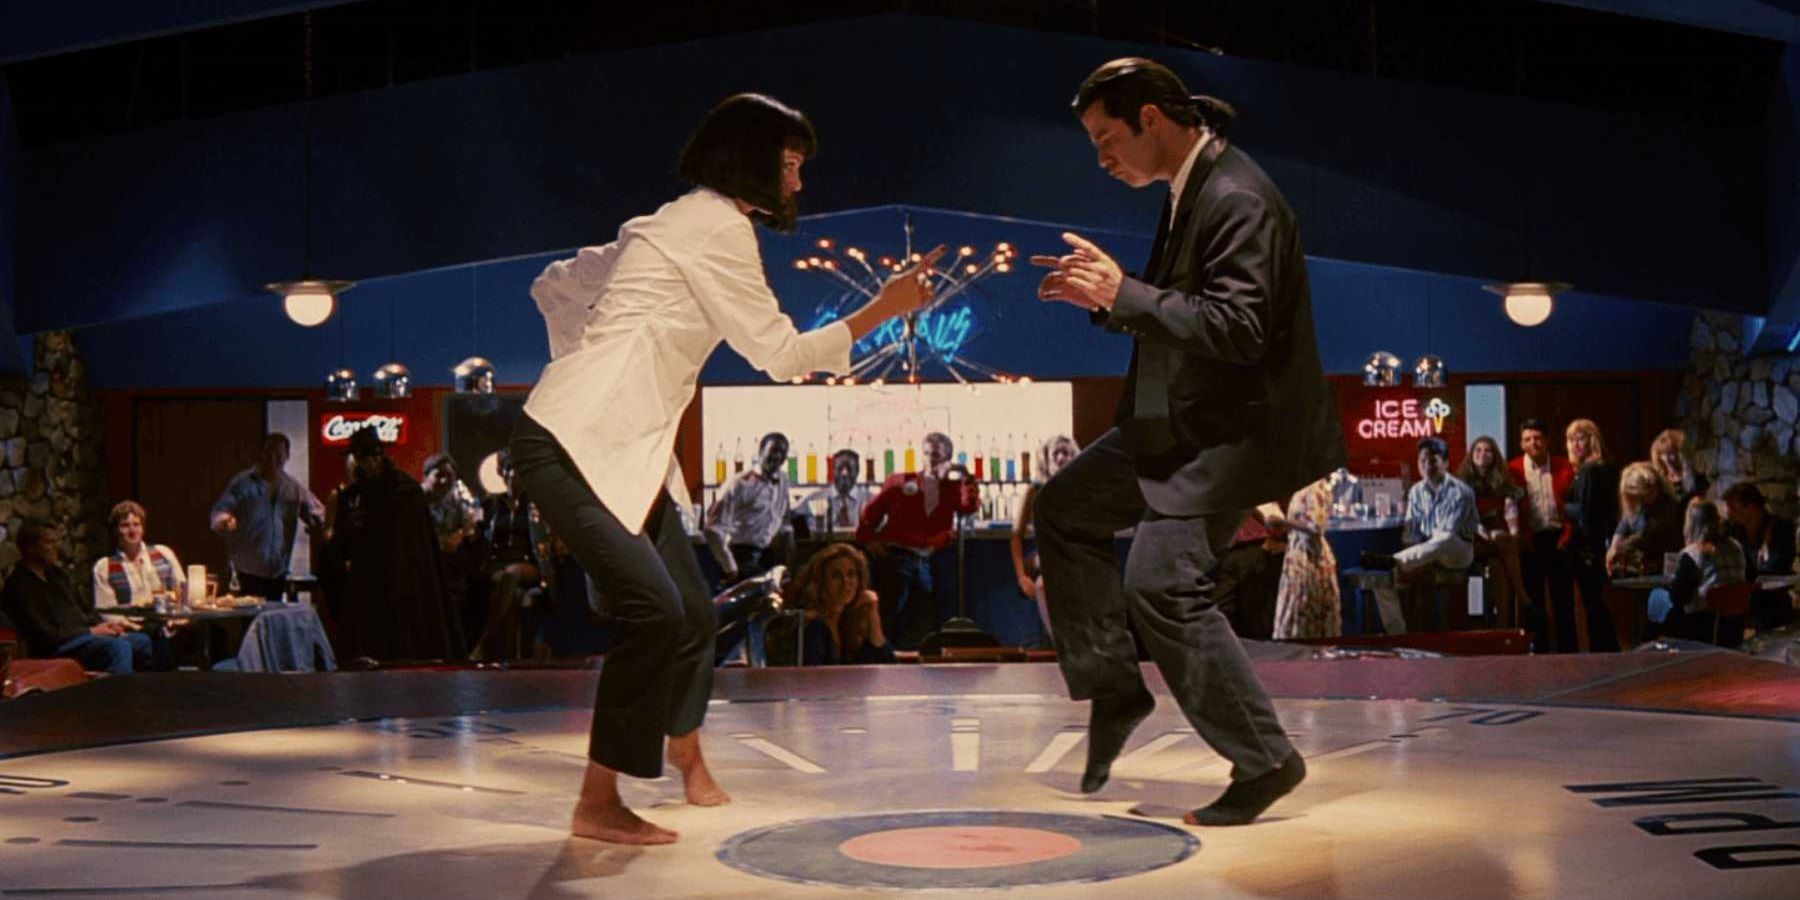 Quentin Tarantino 5 Ways Pulp Fiction Is His Best Crime Movie (& 5 Jackie Brown Is A Close Second)